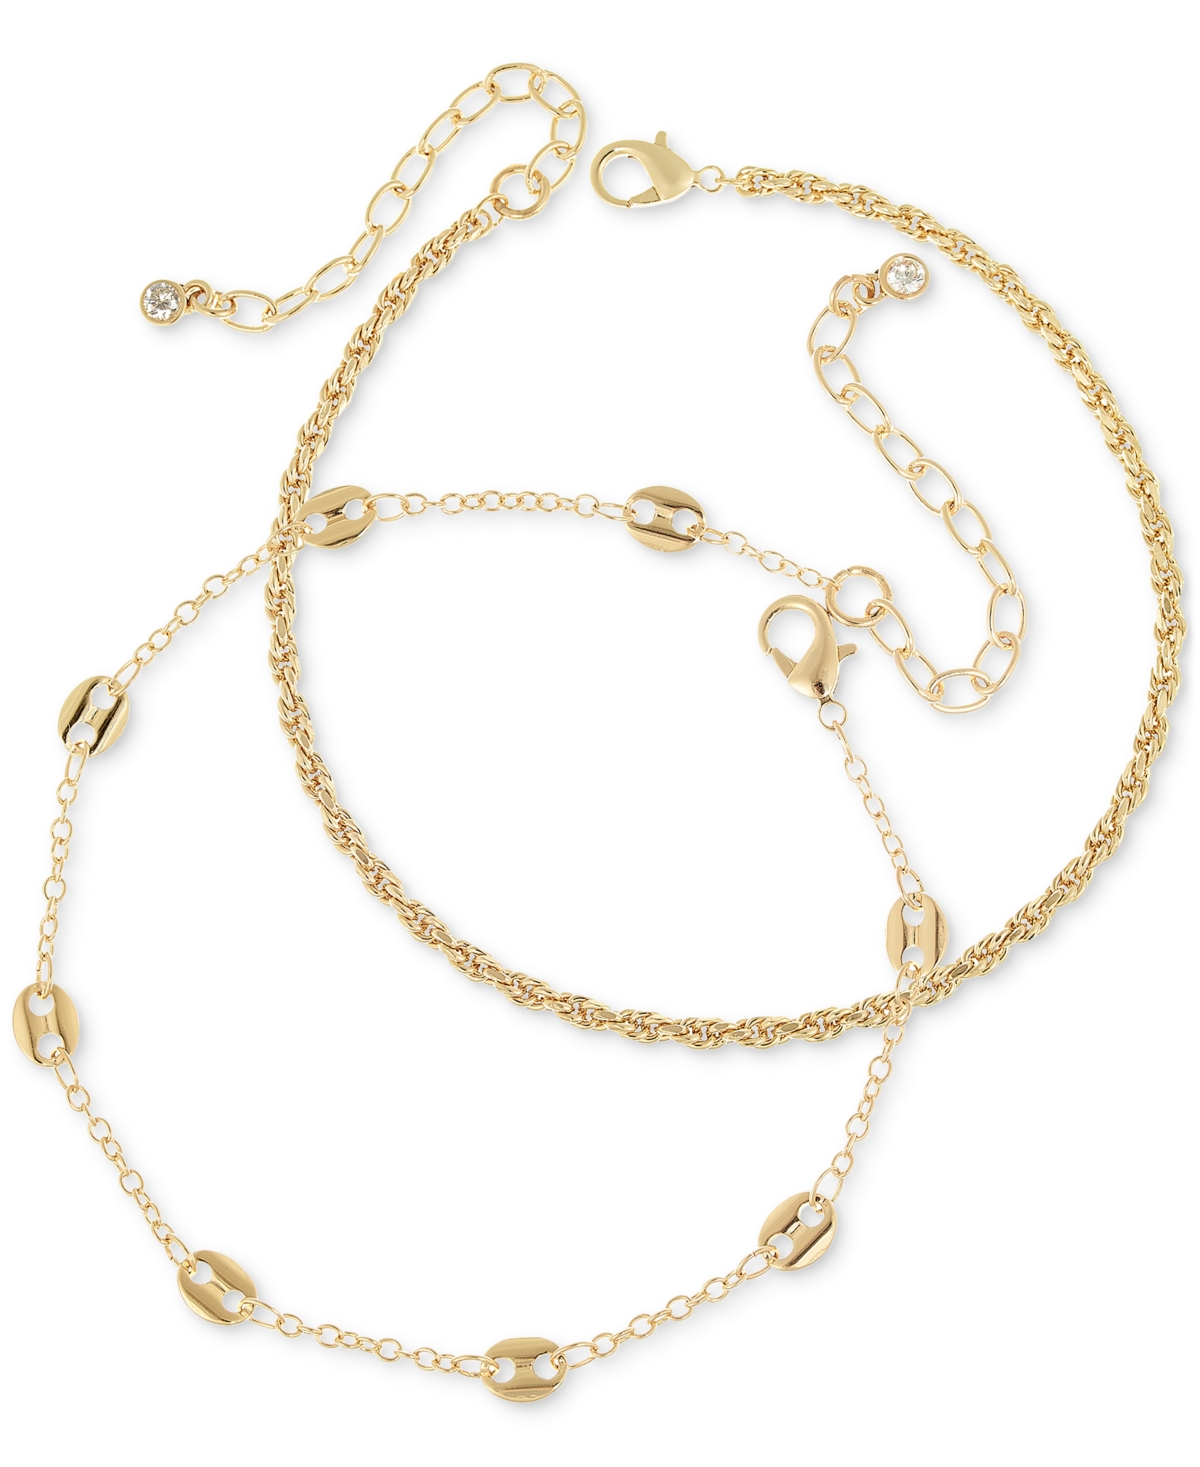 2-Pc. Set Mariner Link & Twist Chain Anklet, Created for Macy's - Silver